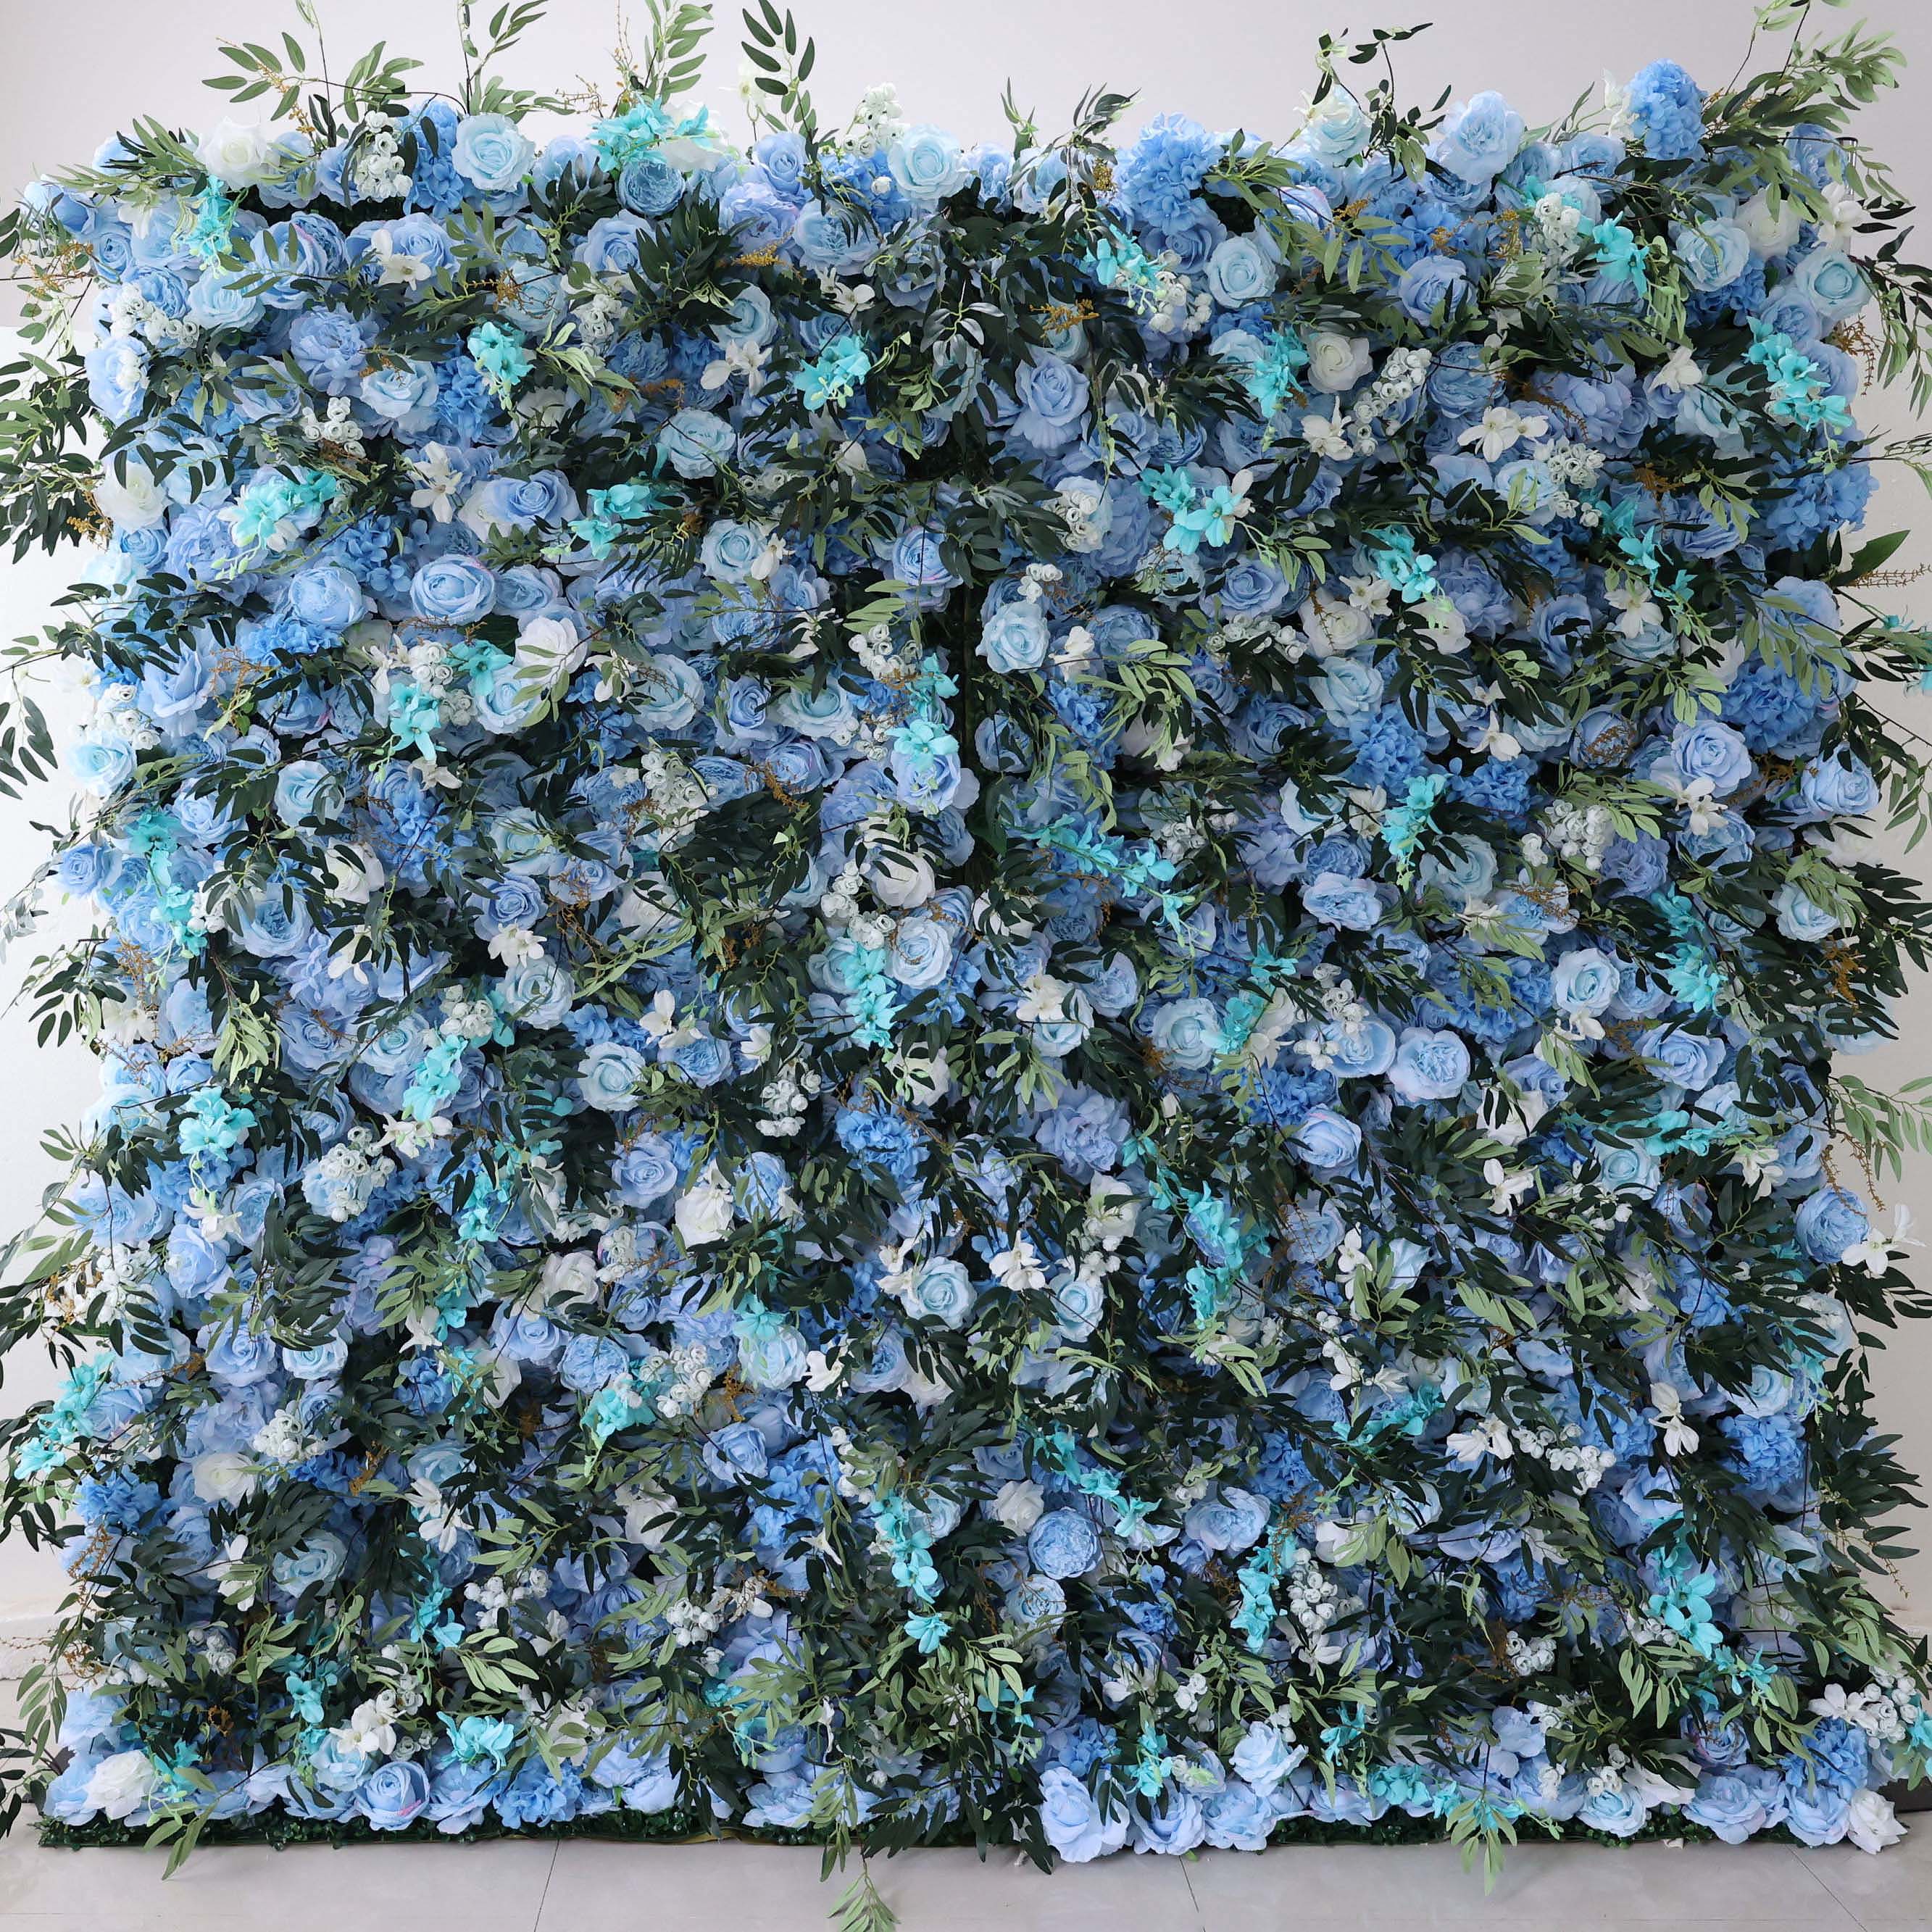 ValarFlowers Artificial Floral Wall Backdrop: Enchanted Bluewood - A Symphony of Deep Blues and Lush Greens.